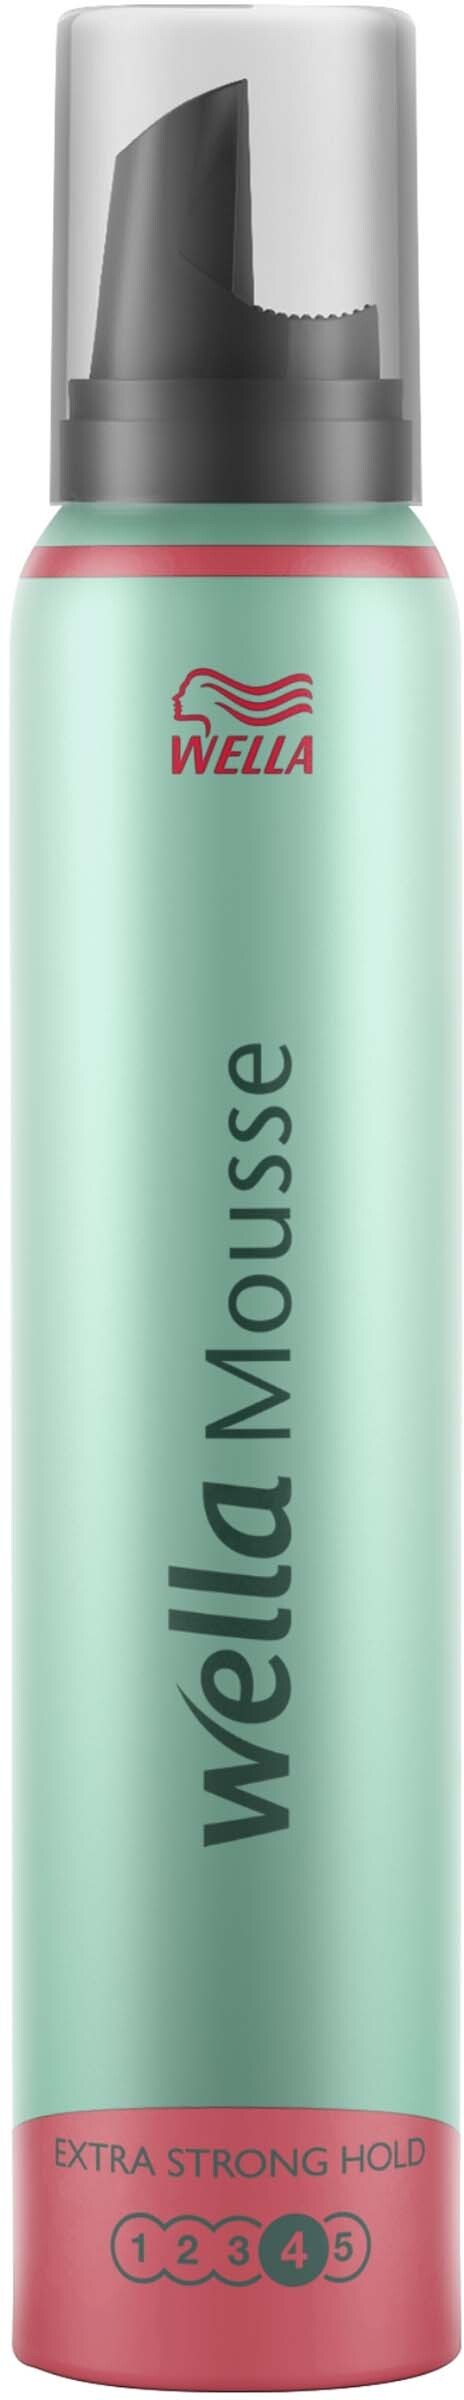 Wella Styling Wella Classic Styling Mousse Extra Strong 200 ml